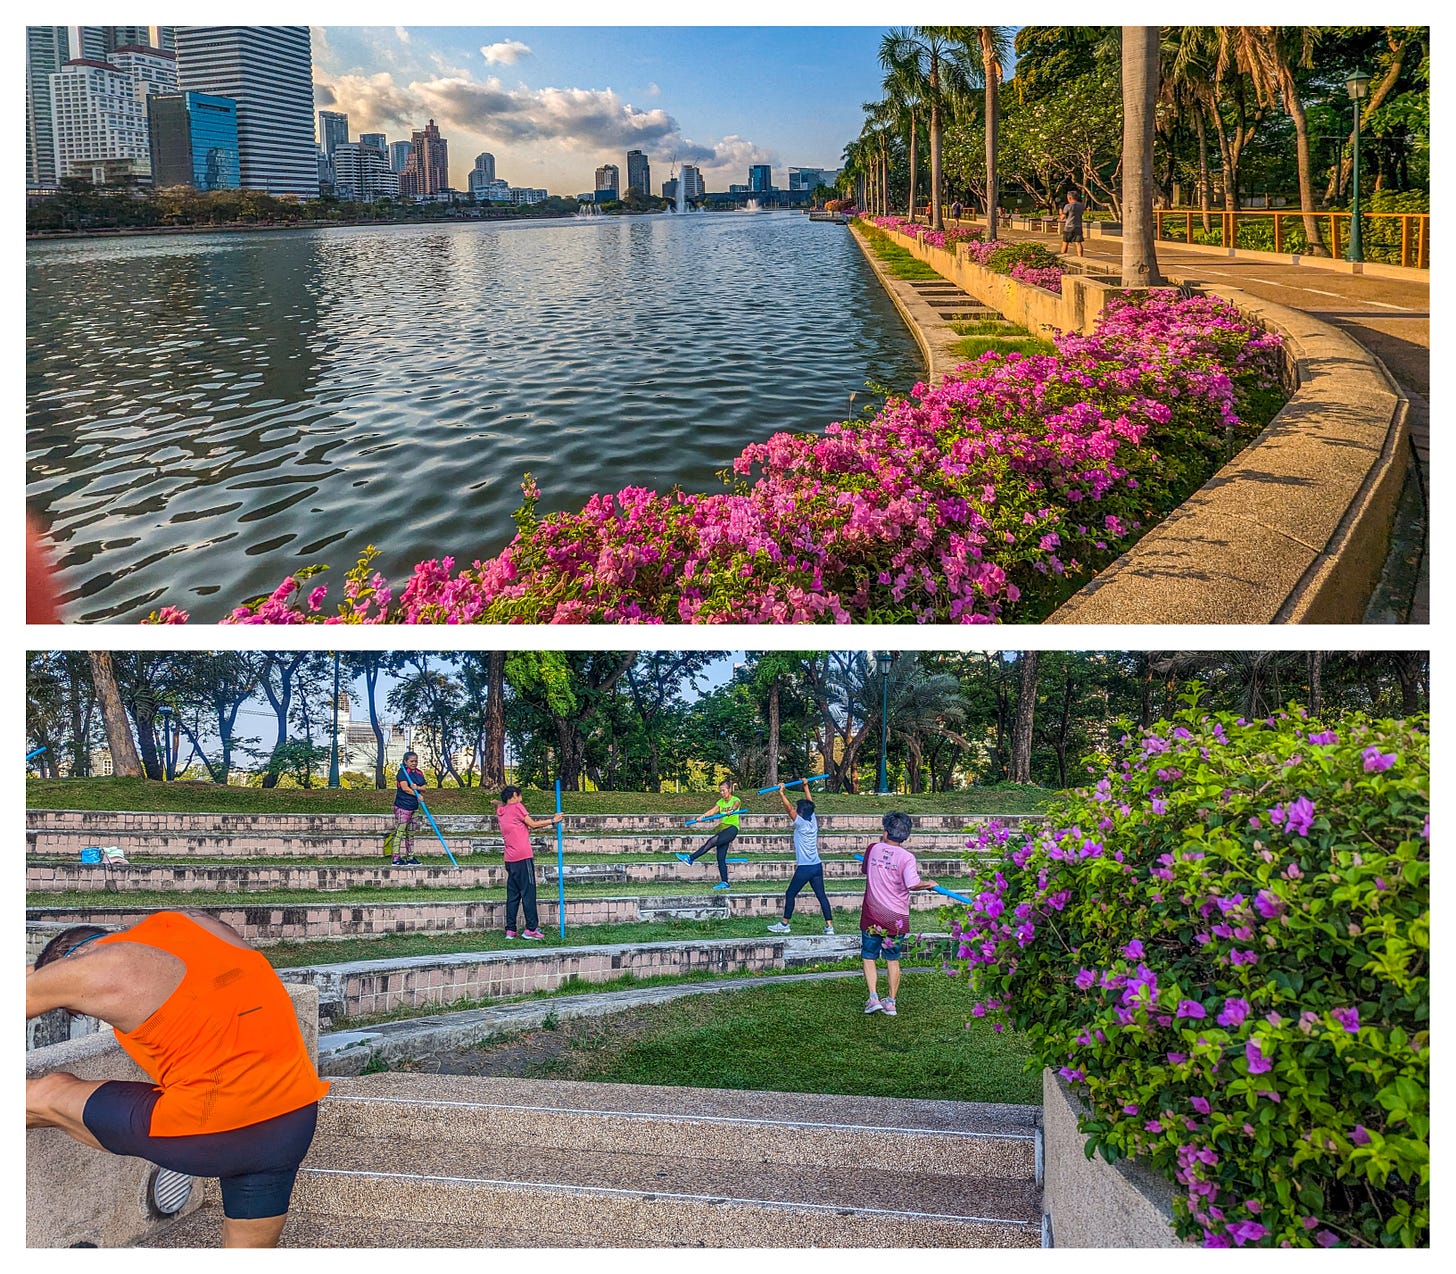 Top photo shows the lake at the park. Purple flowers are in the foreground, tall buildings in the back. Bottom phot shows people exercising. 